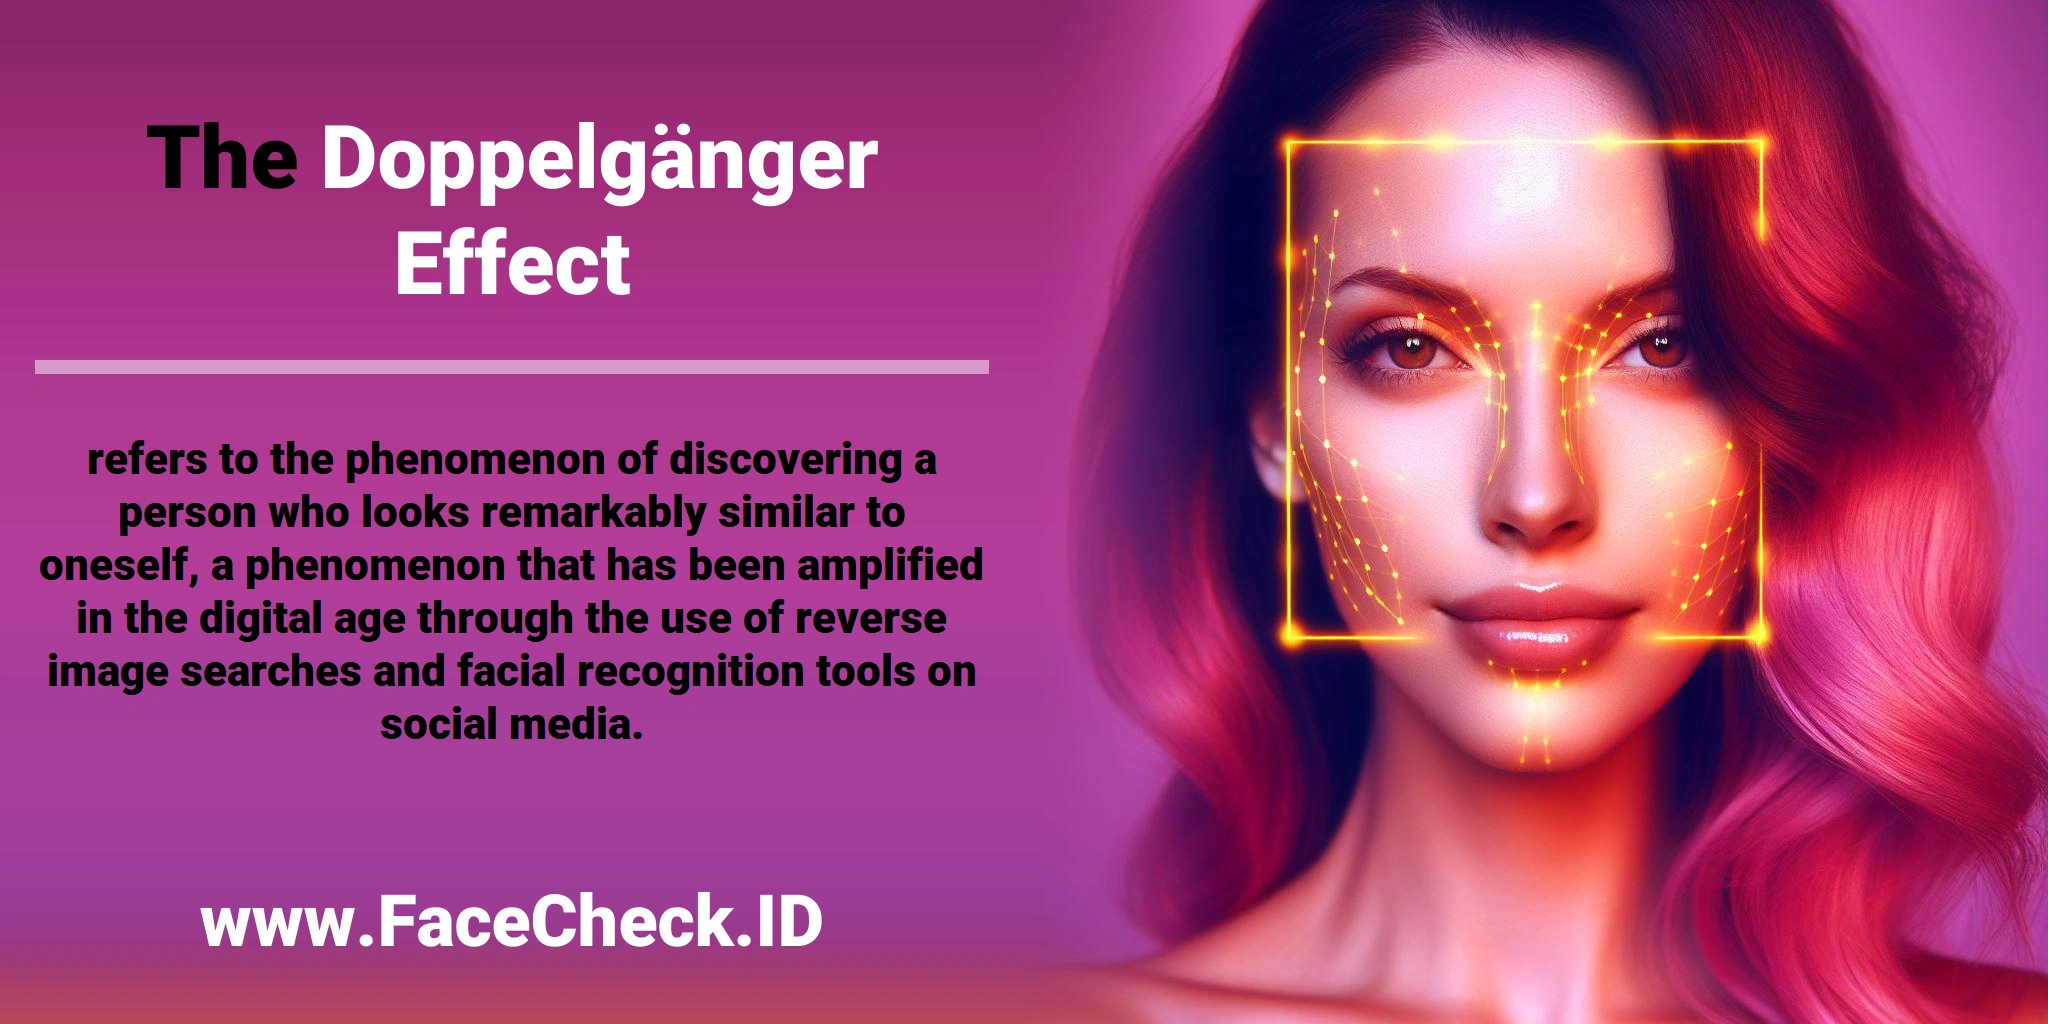 The <b>Doppelgänger Effect</b> refers to the phenomenon of discovering a person who looks remarkably similar to oneself, a phenomenon that has been amplified in the digital age through the use of reverse image searches and facial recognition tools on social media.